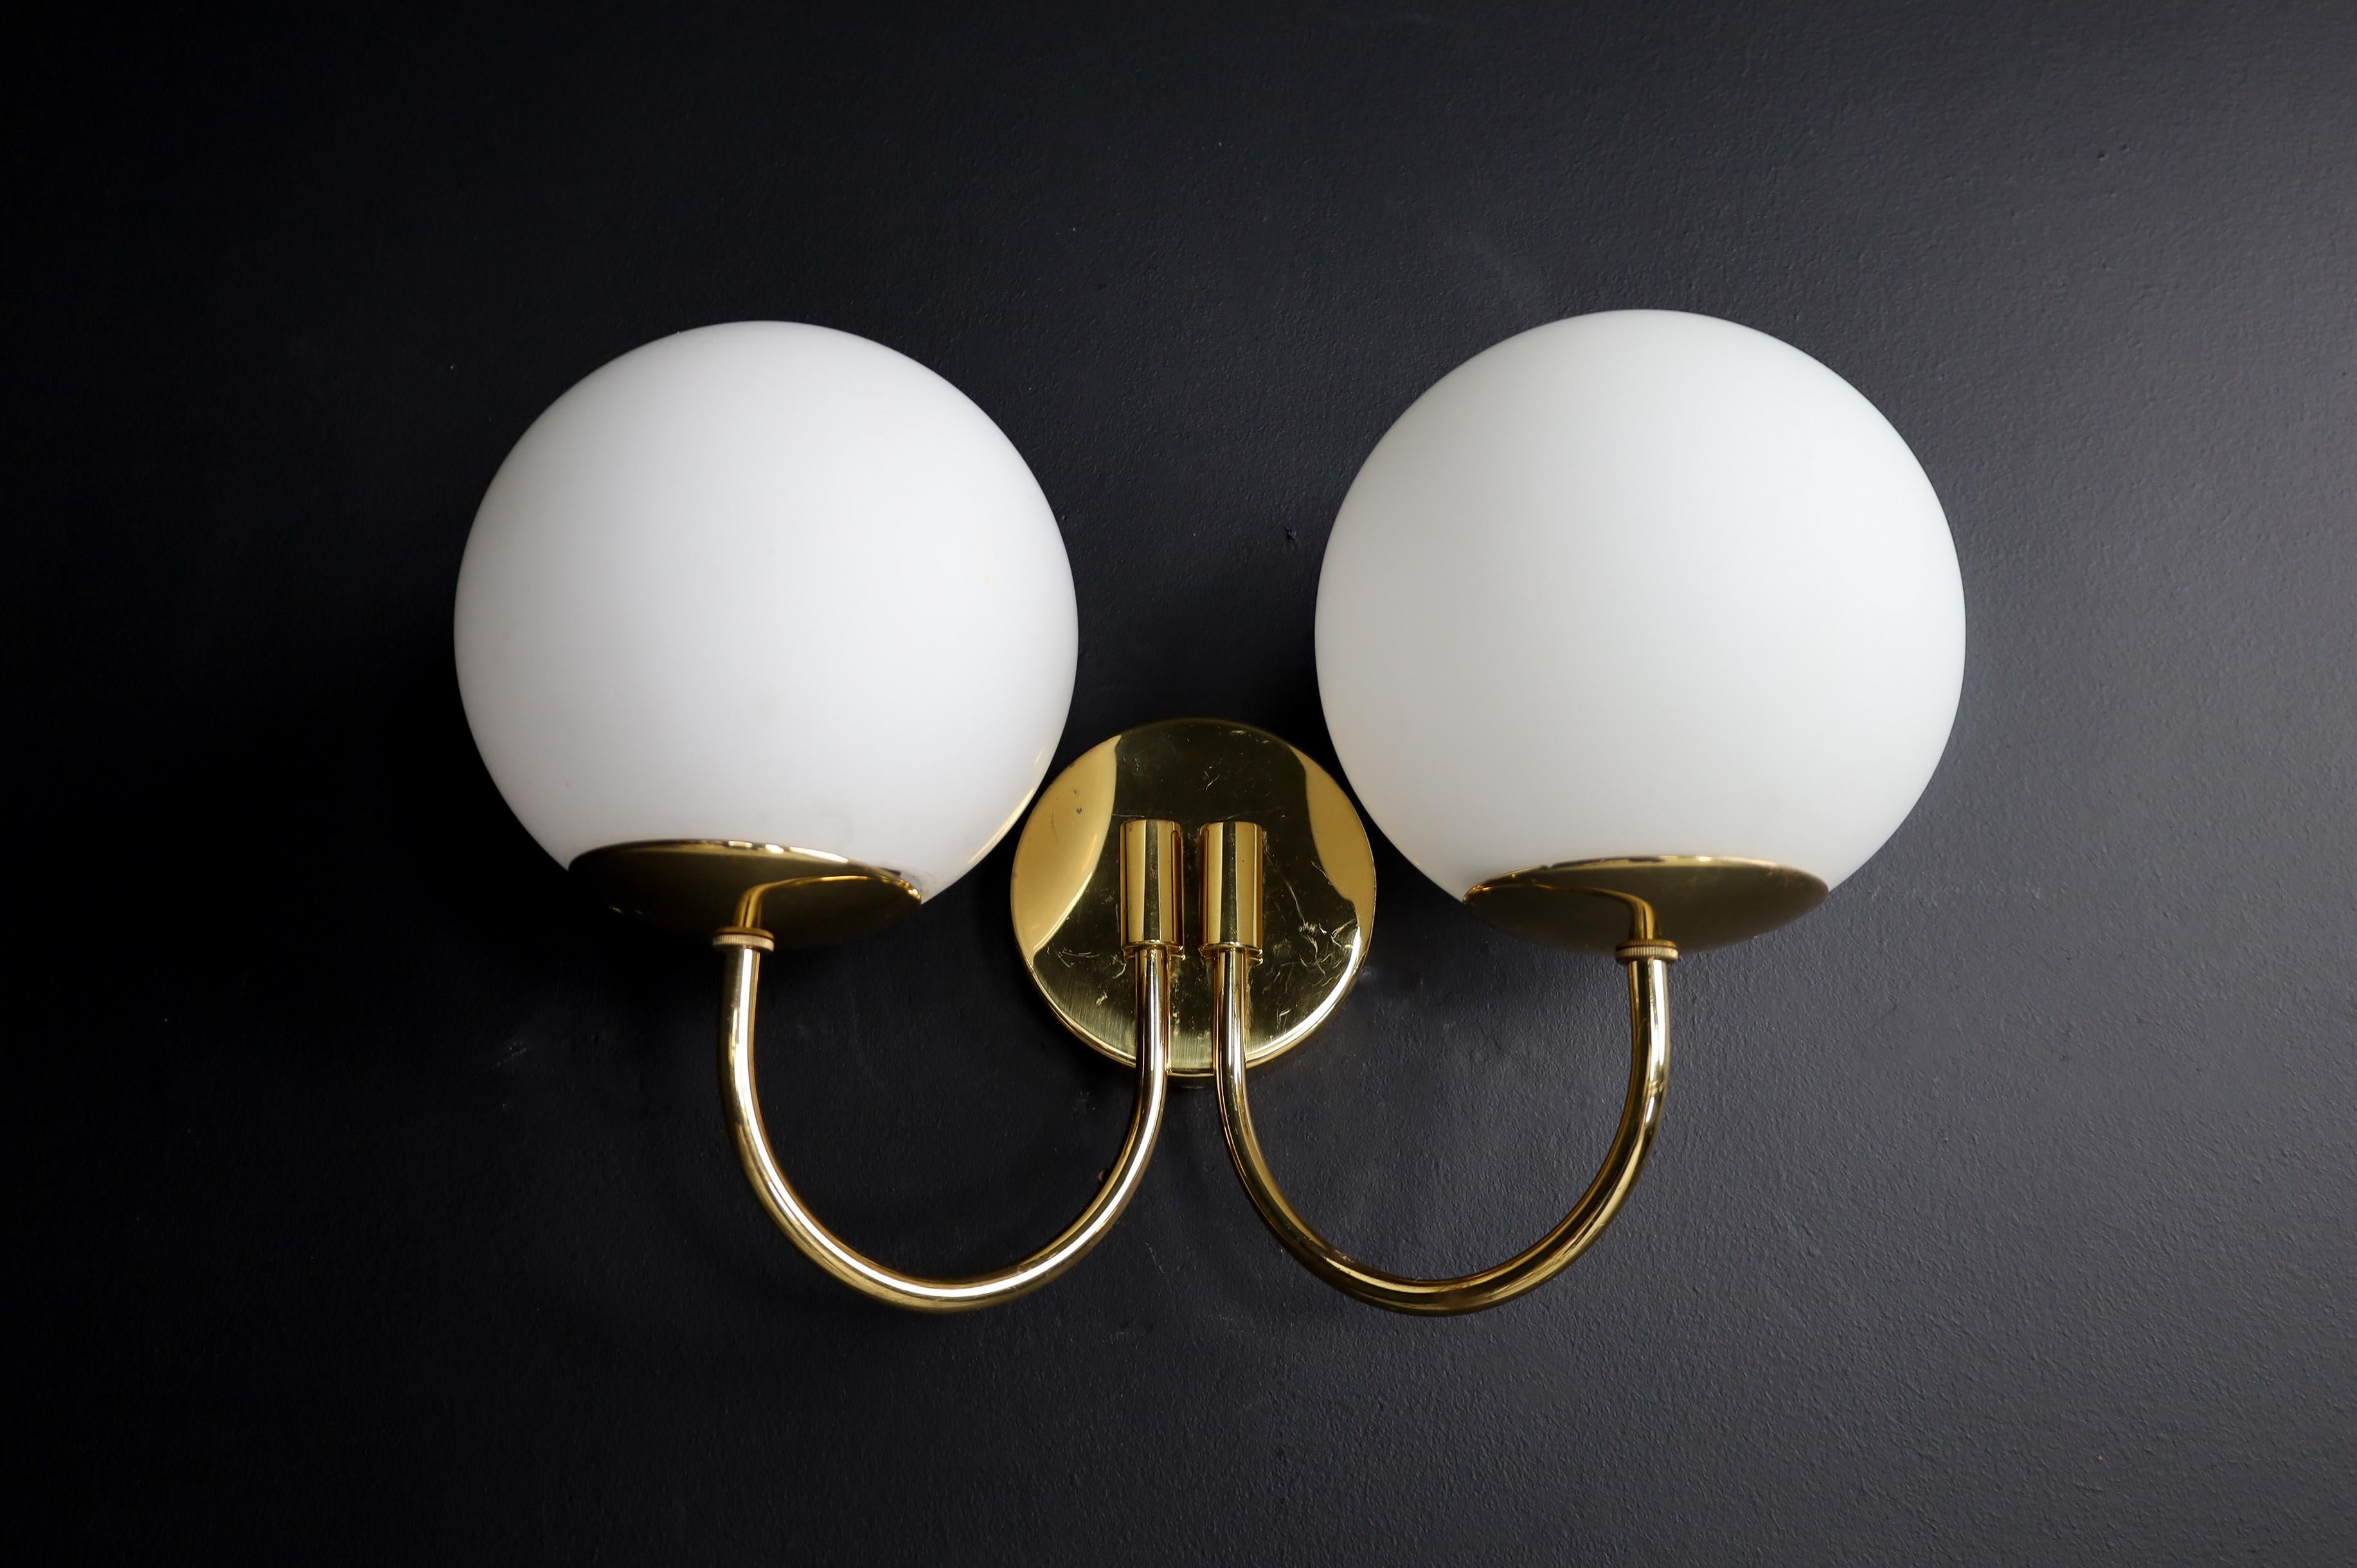 Elegant Sconces with Brass Fixtures and Opaline Glass Globes, Italy, 1960s For Sale 3